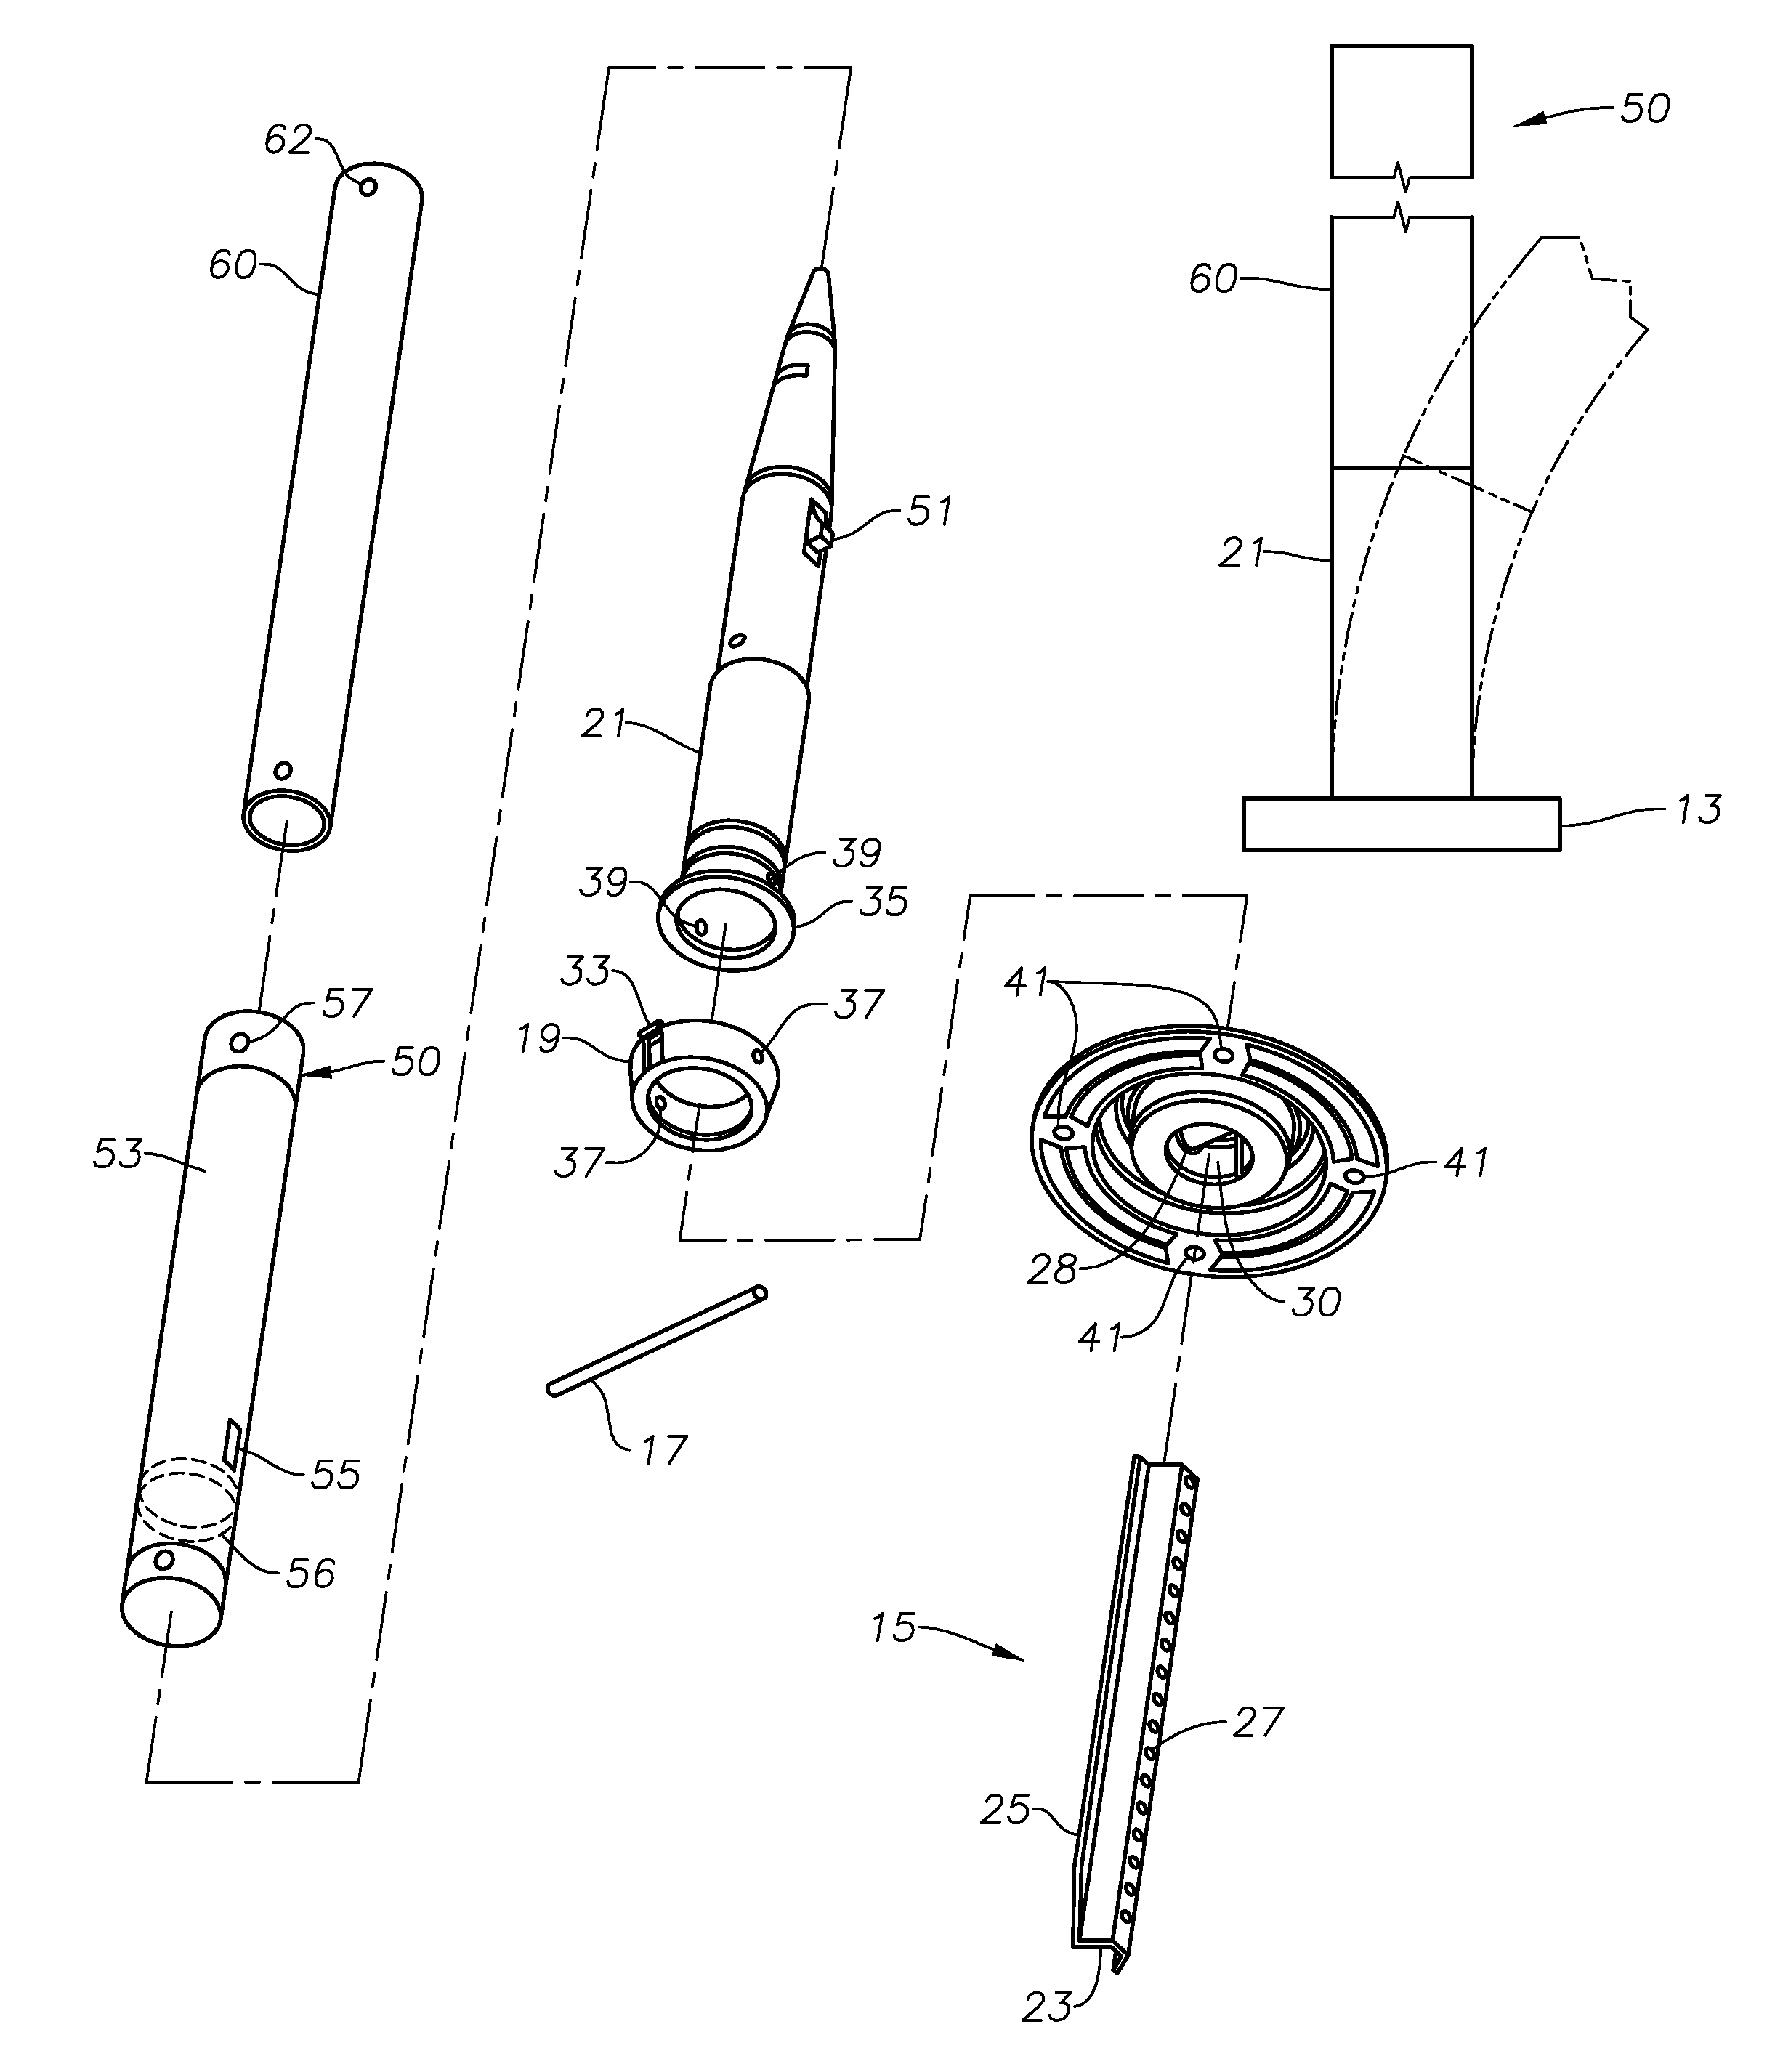 Traffic control marker with protective cover and stiffening elements